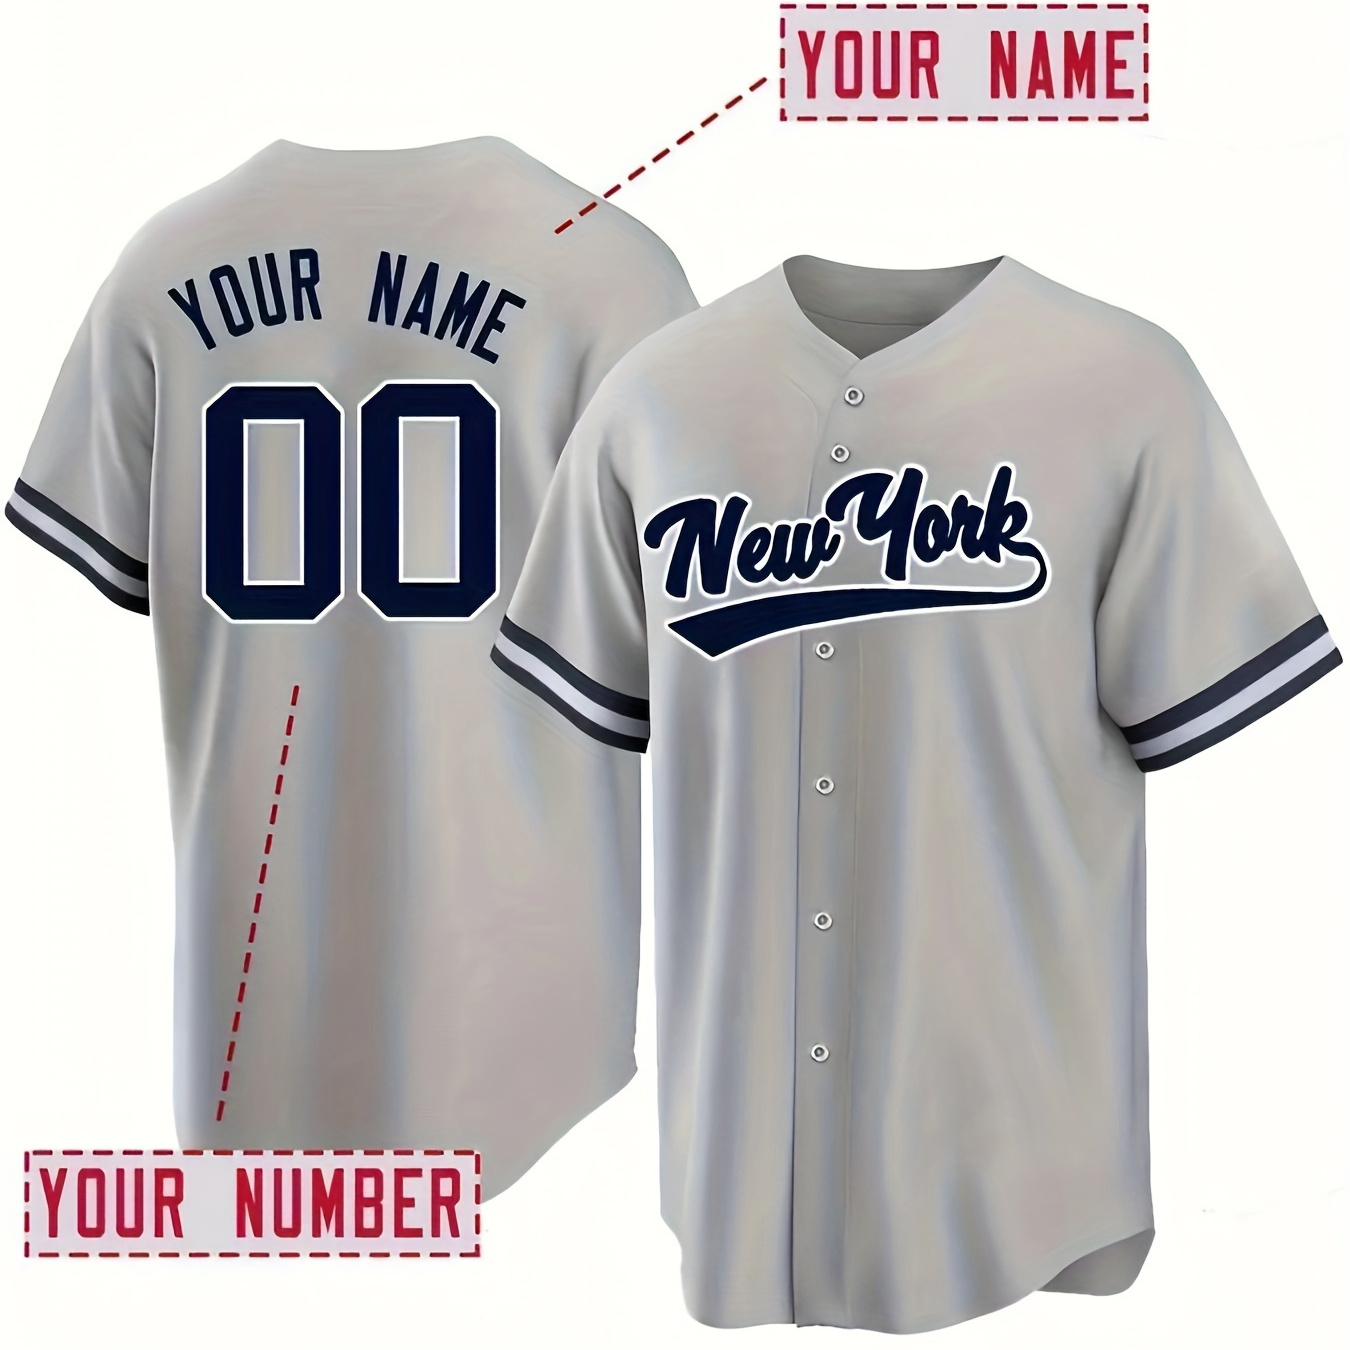 

Customized Name And Number Design, New York Men's Short Sleeve Retro Casual V-neck Embroidery Baseball Jersey, Sports Shirt For Team Training